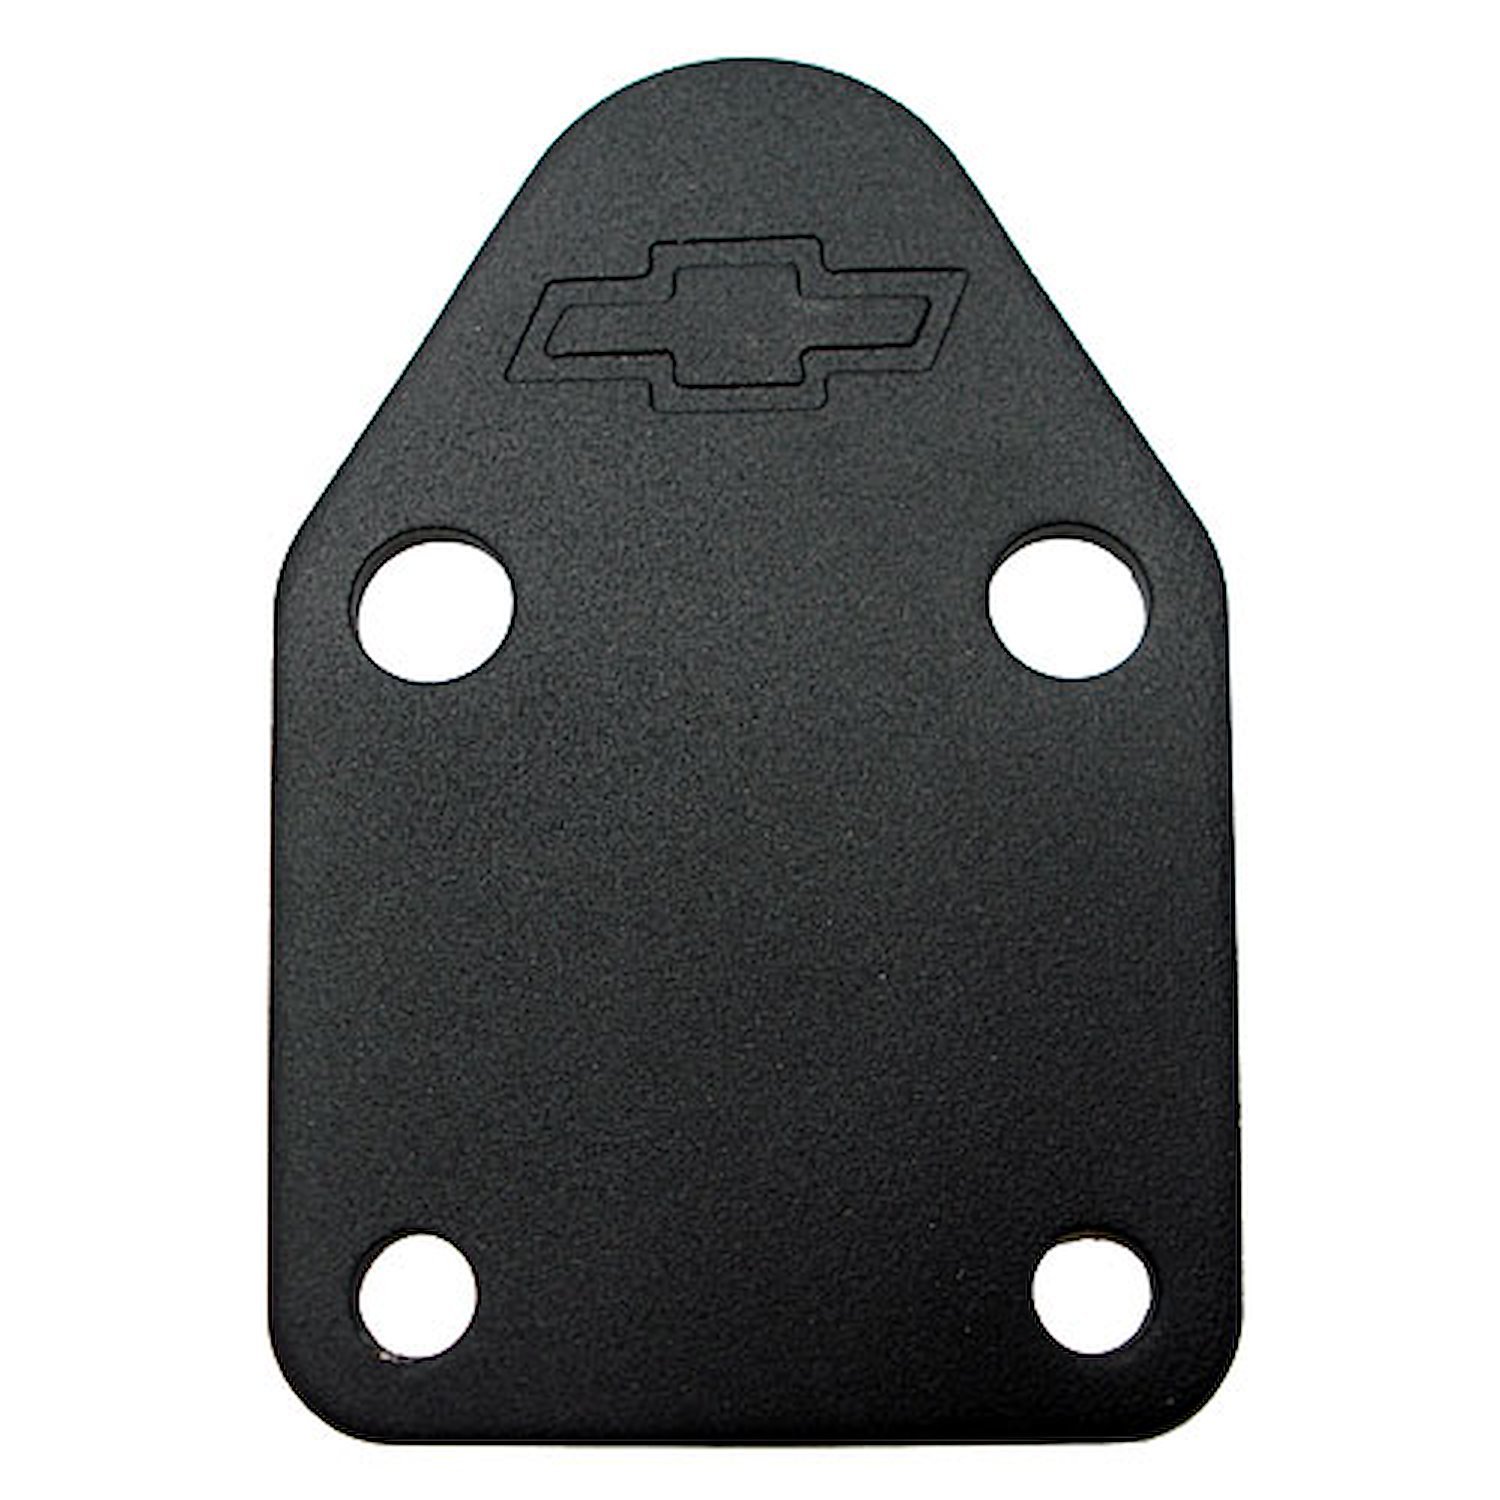 Bowtie Fuel Pump Block-Off Plate for Small Block Chevy in Black Crinkle